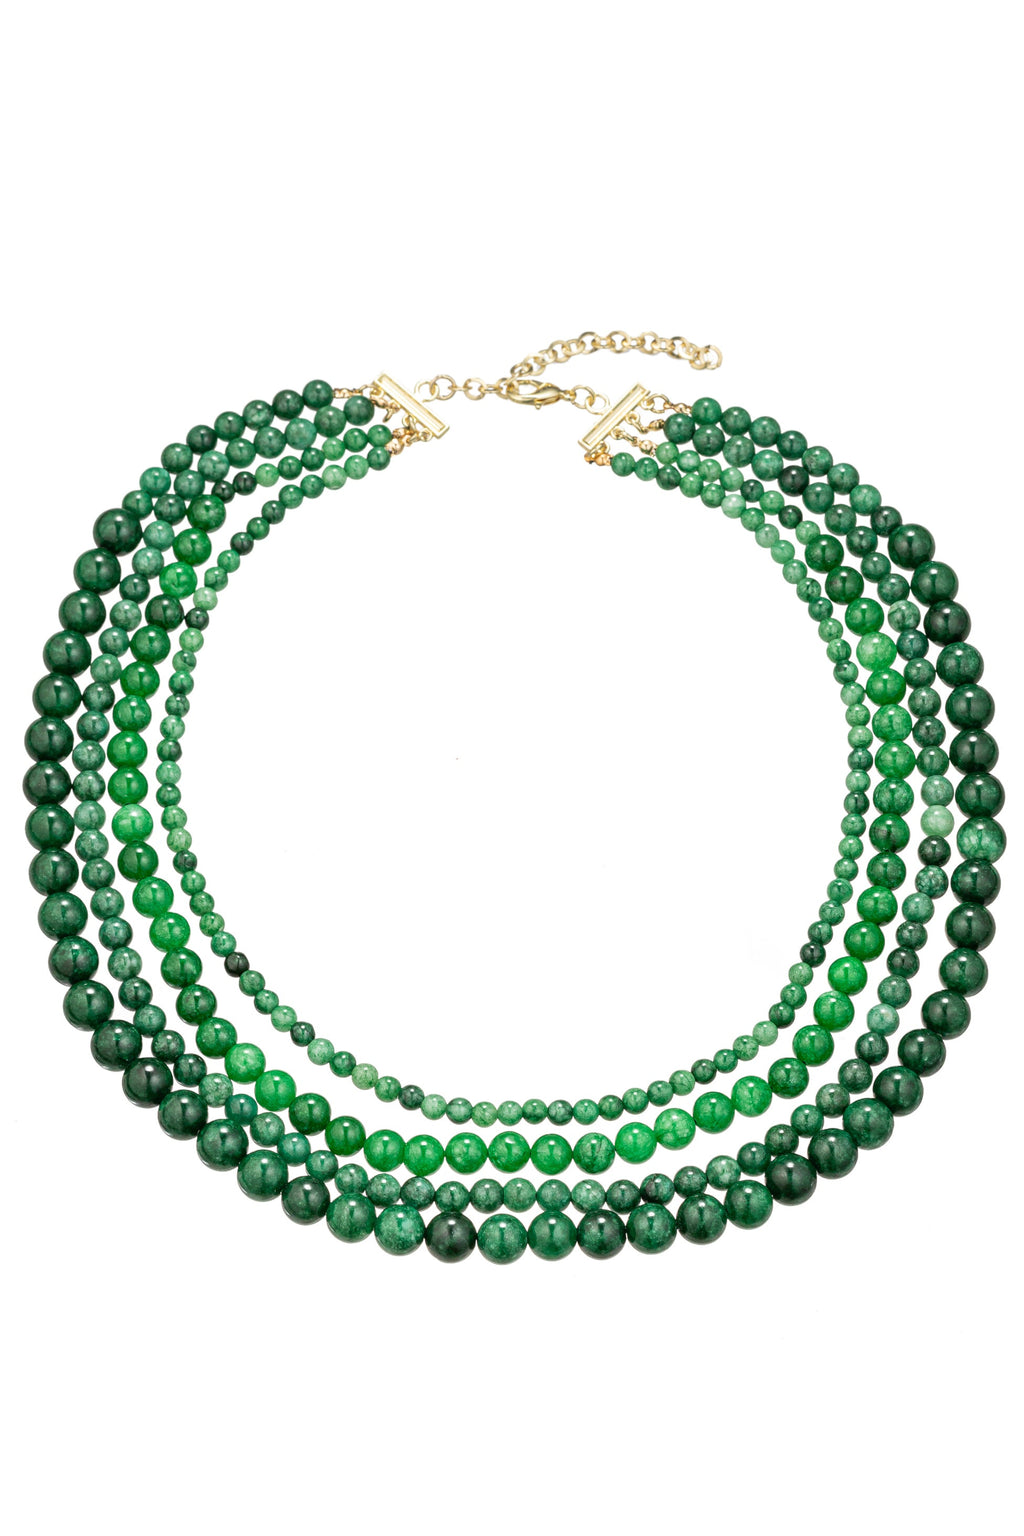 Green Agate Multi Strand Beaded Necklace: Nature's Beauty Adorns Your Neck.